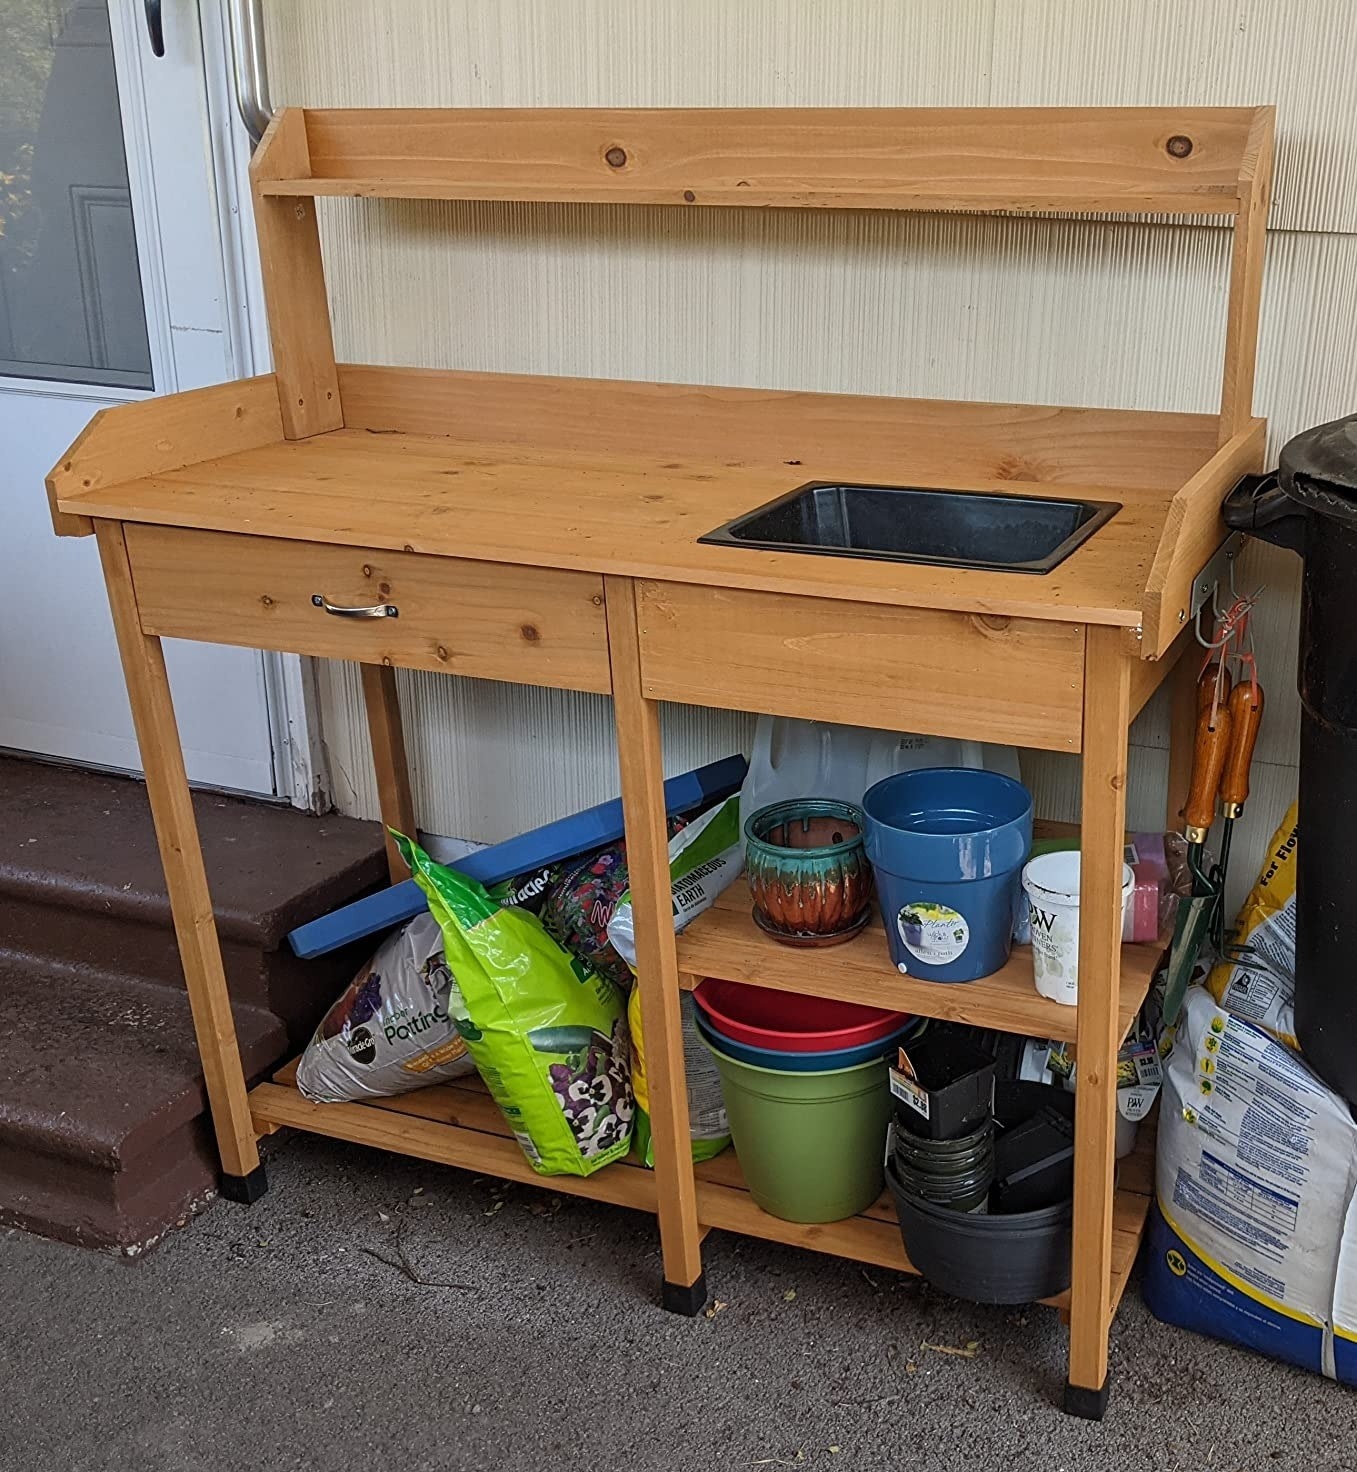 wood potting bench with shelves and storage areas for gardening supplies